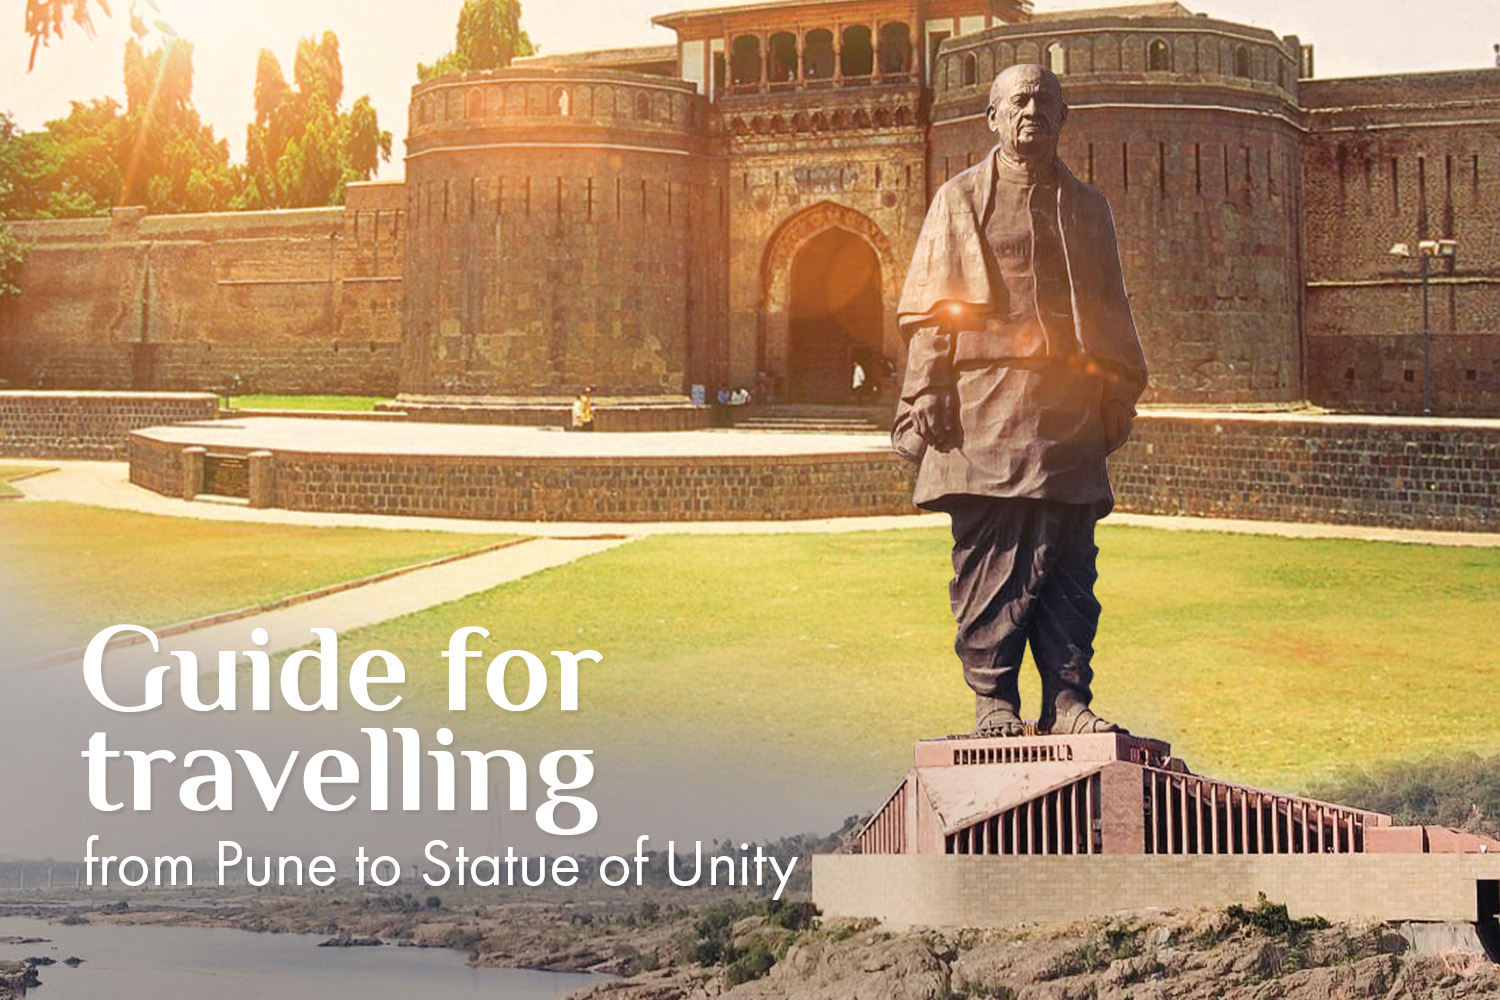 Pune to Statue of Unity